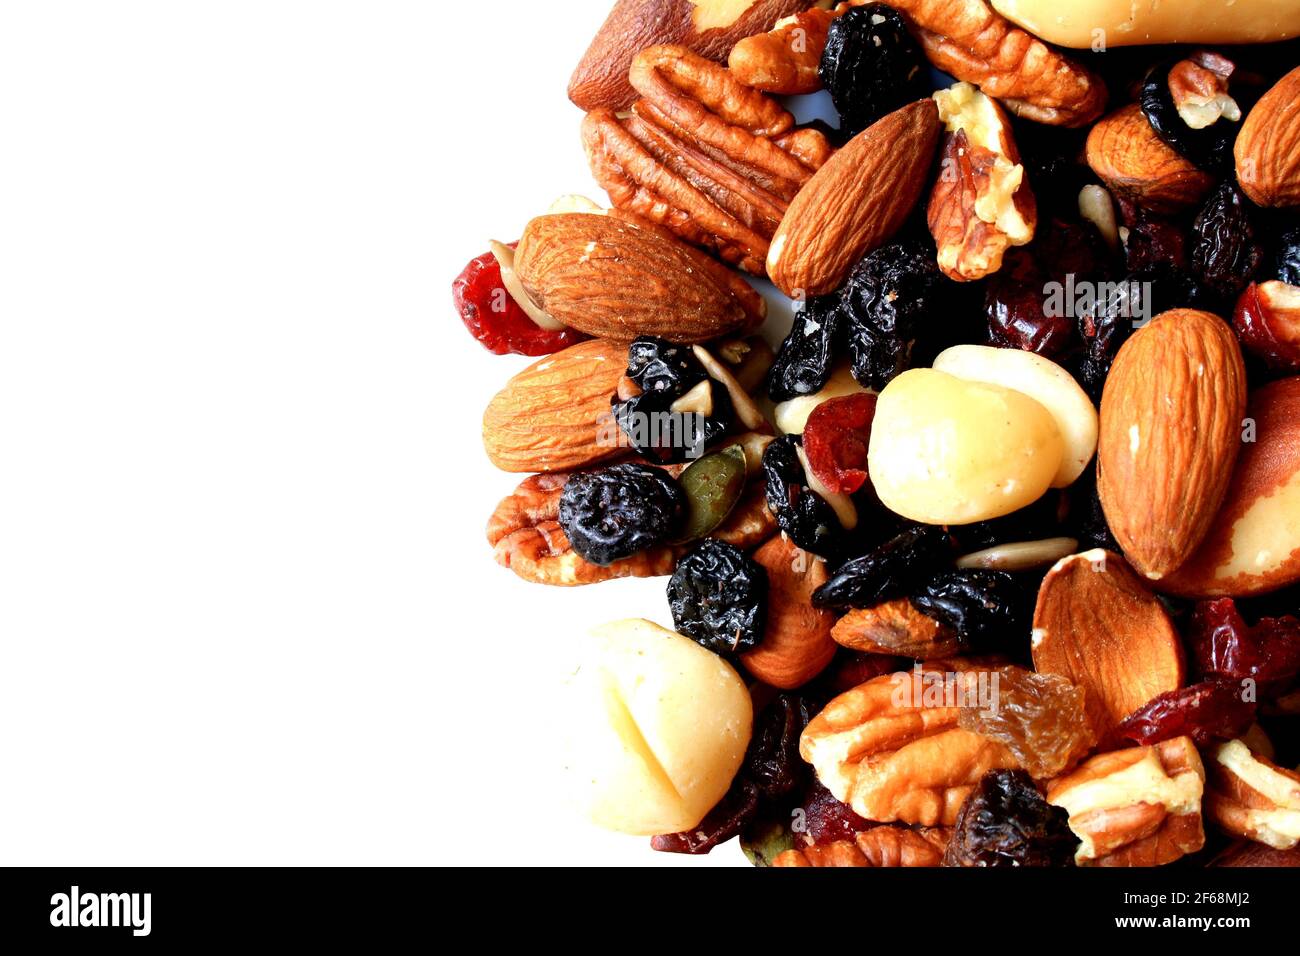 A heap of almonds, macadamia nuts, pecan nuts, raisins, sunflower seeds, sultanas, dried cherries, pumpkin seeds, Brazil nuts and dried cranberries Stock Photo